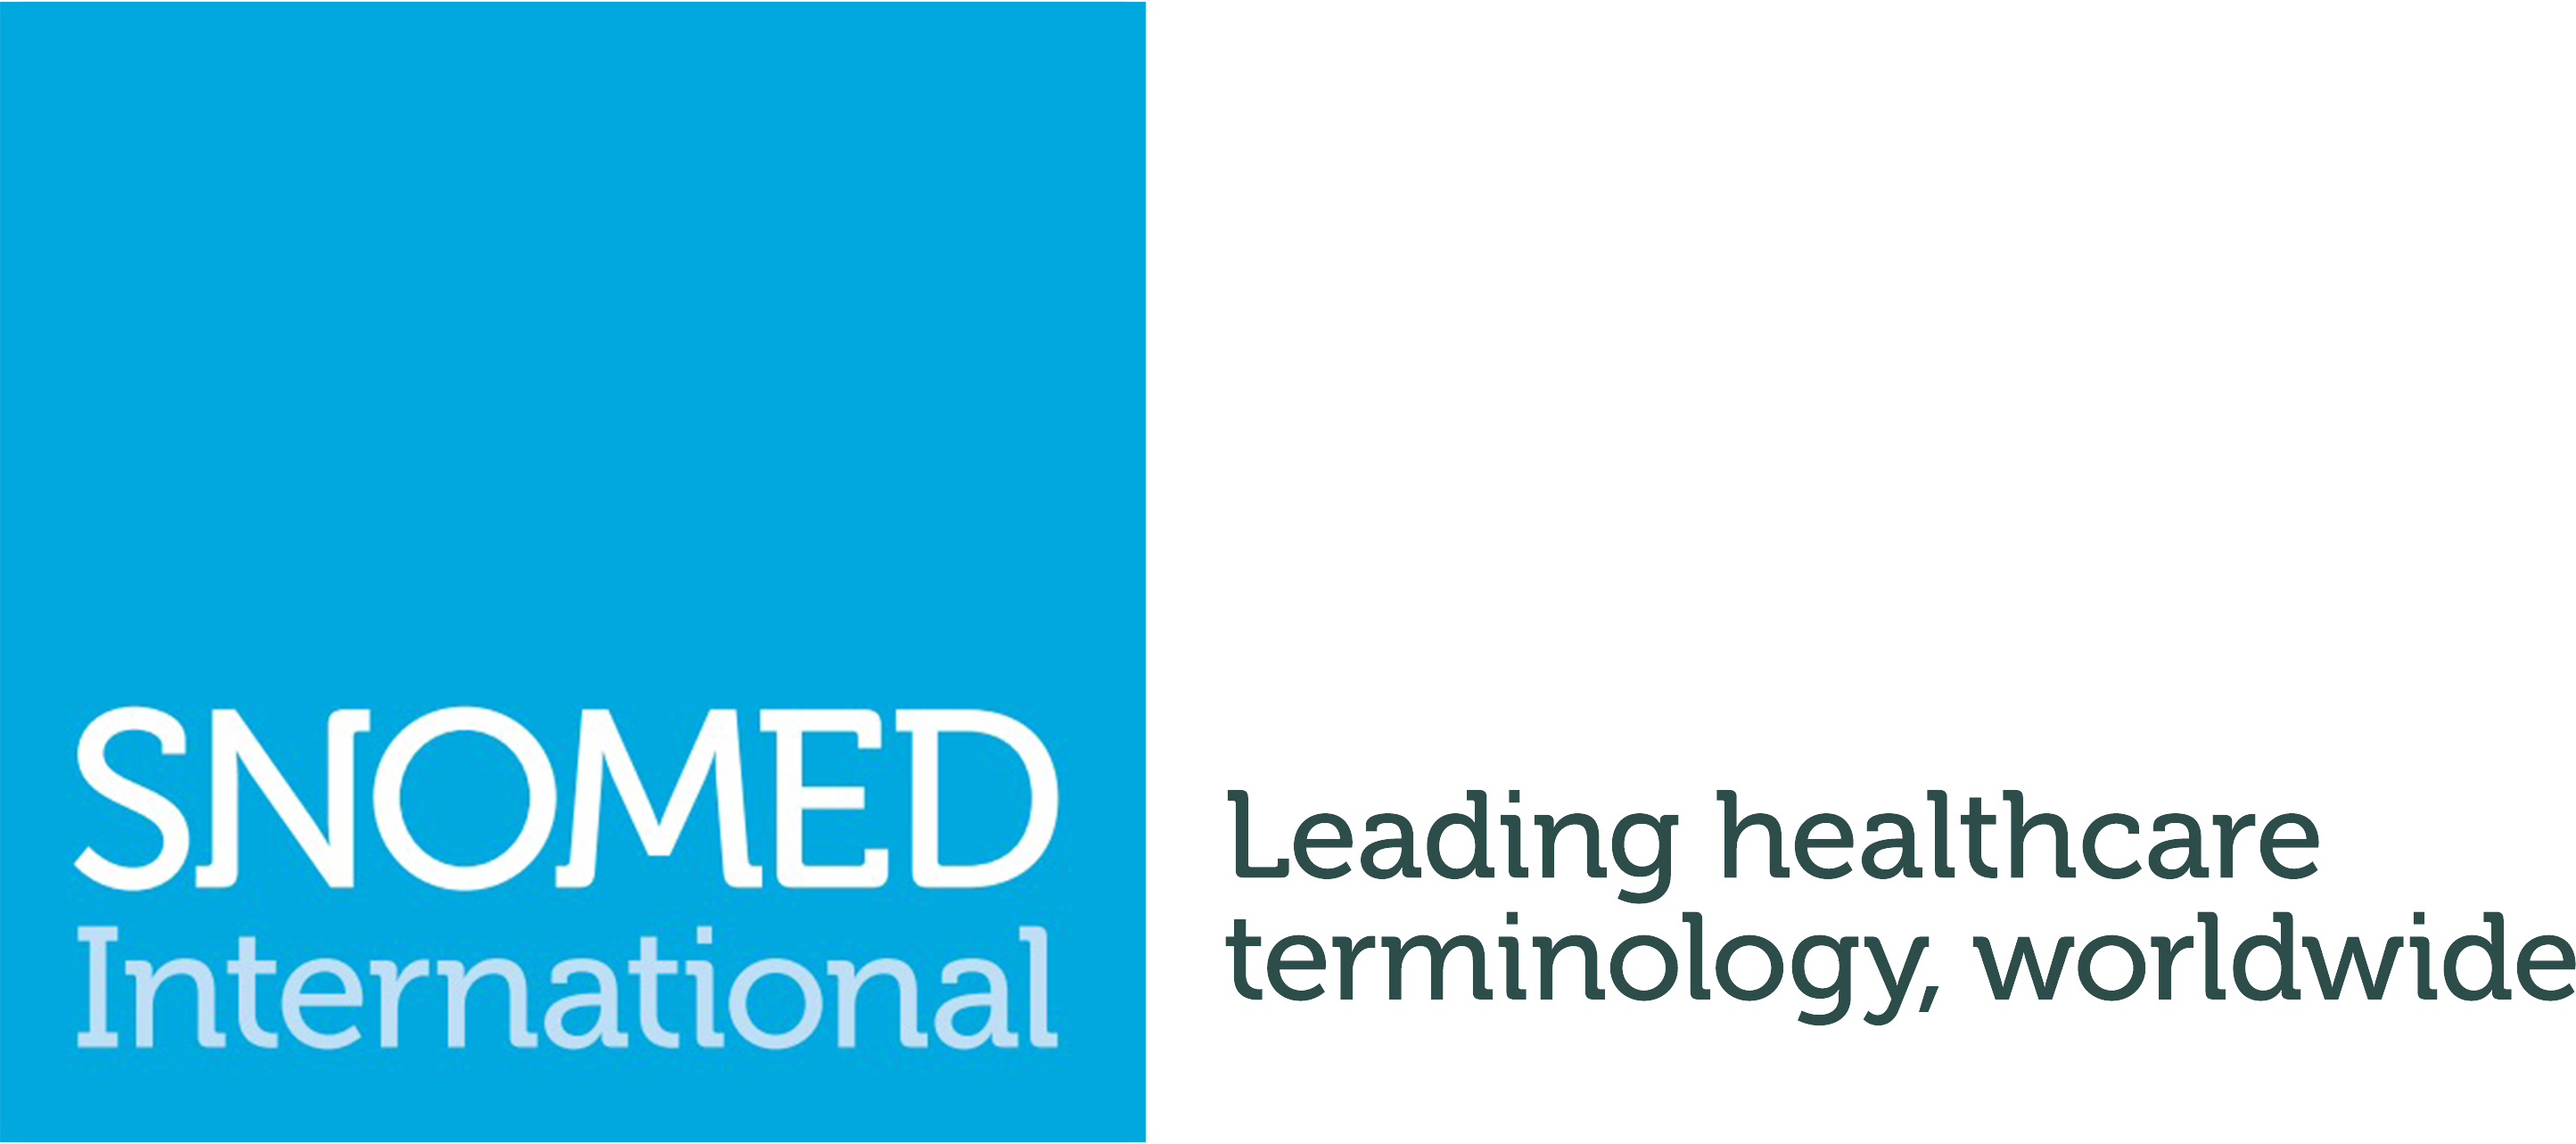 SNOMED International delivering SNOMED, the global clinical terminology